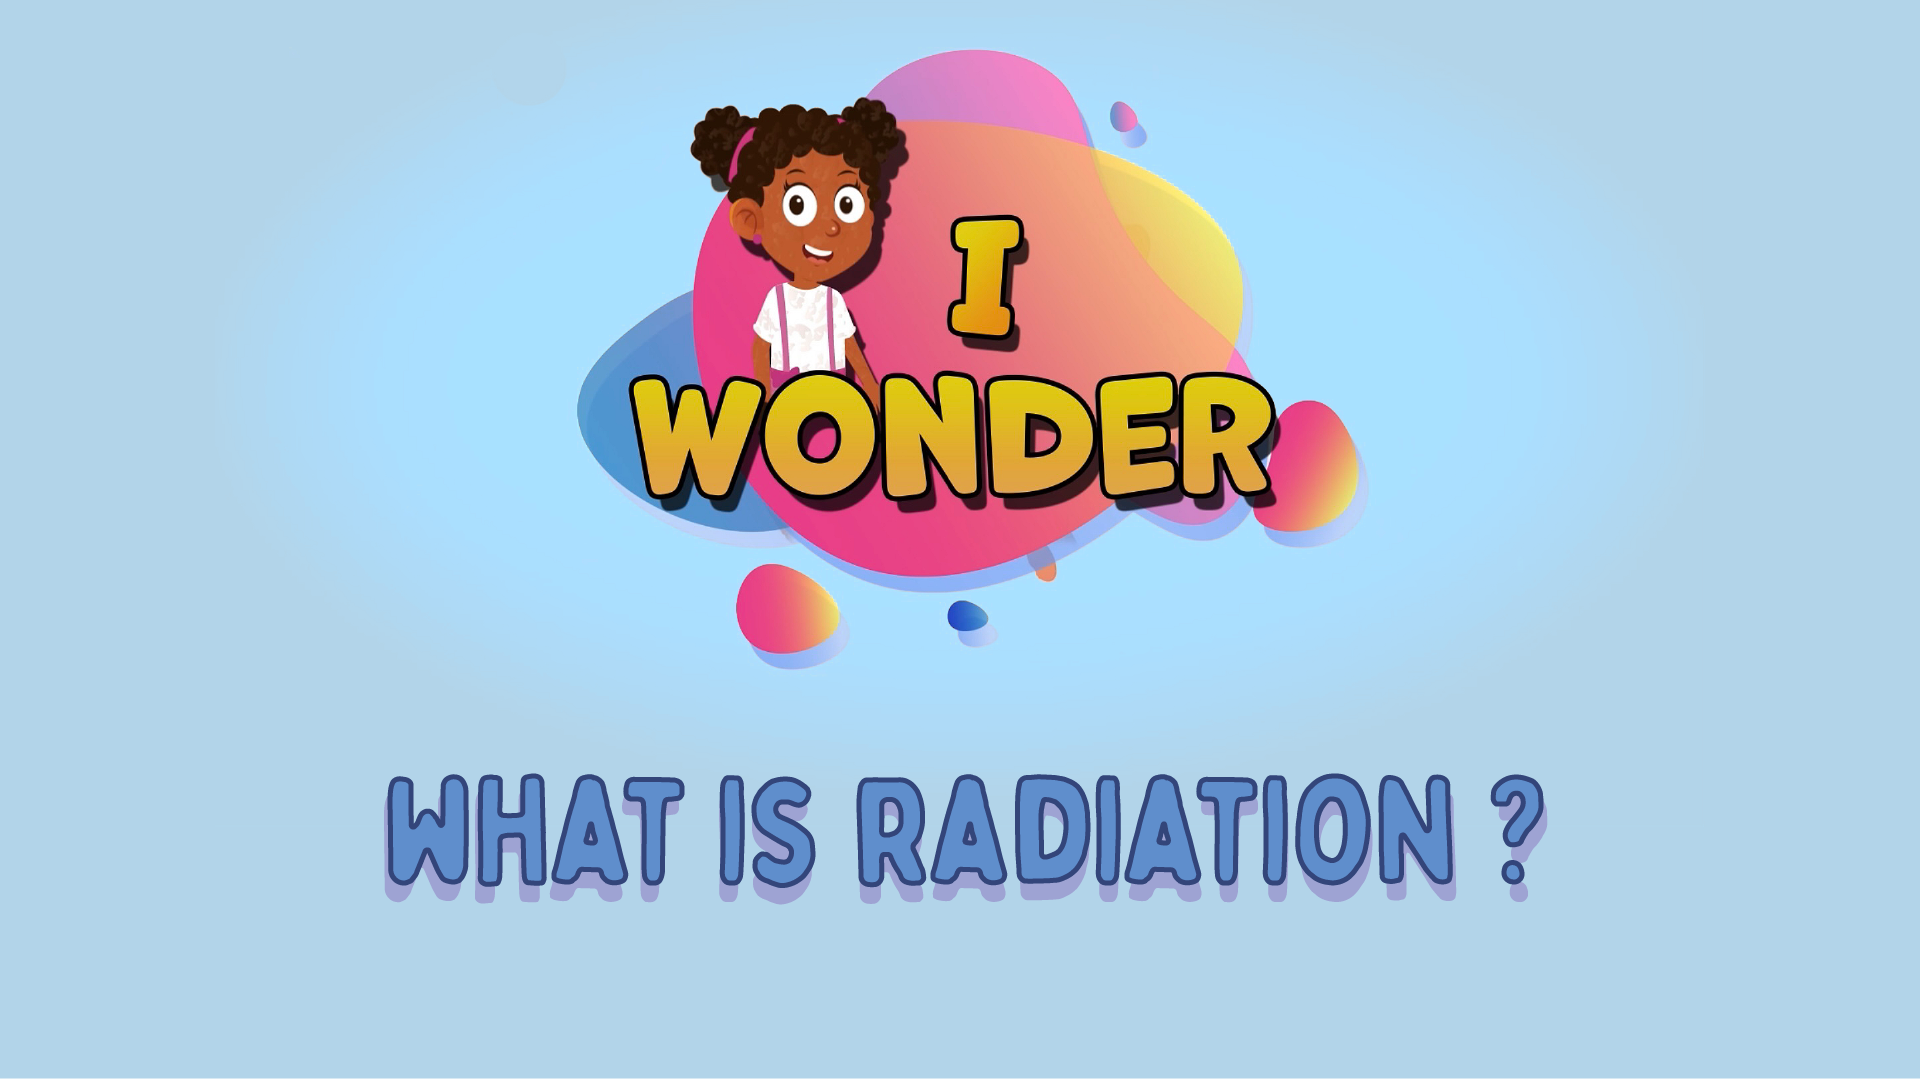 What Is Radiation?